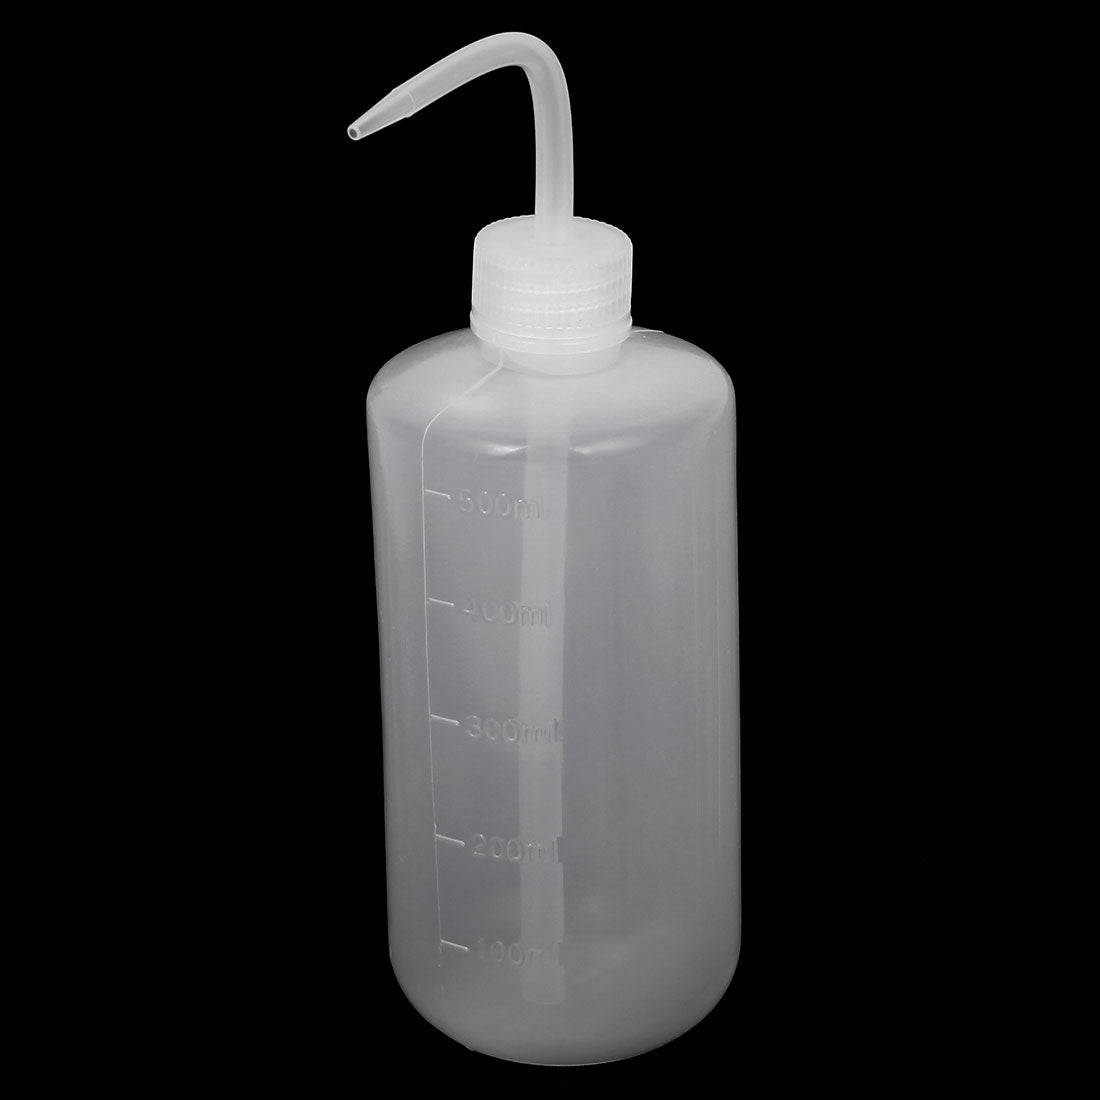 uxcell Uxcell Lab Right Angle Bent Tip Plastic Liquid Storage Squeeze Bottle Dispenser 500mL